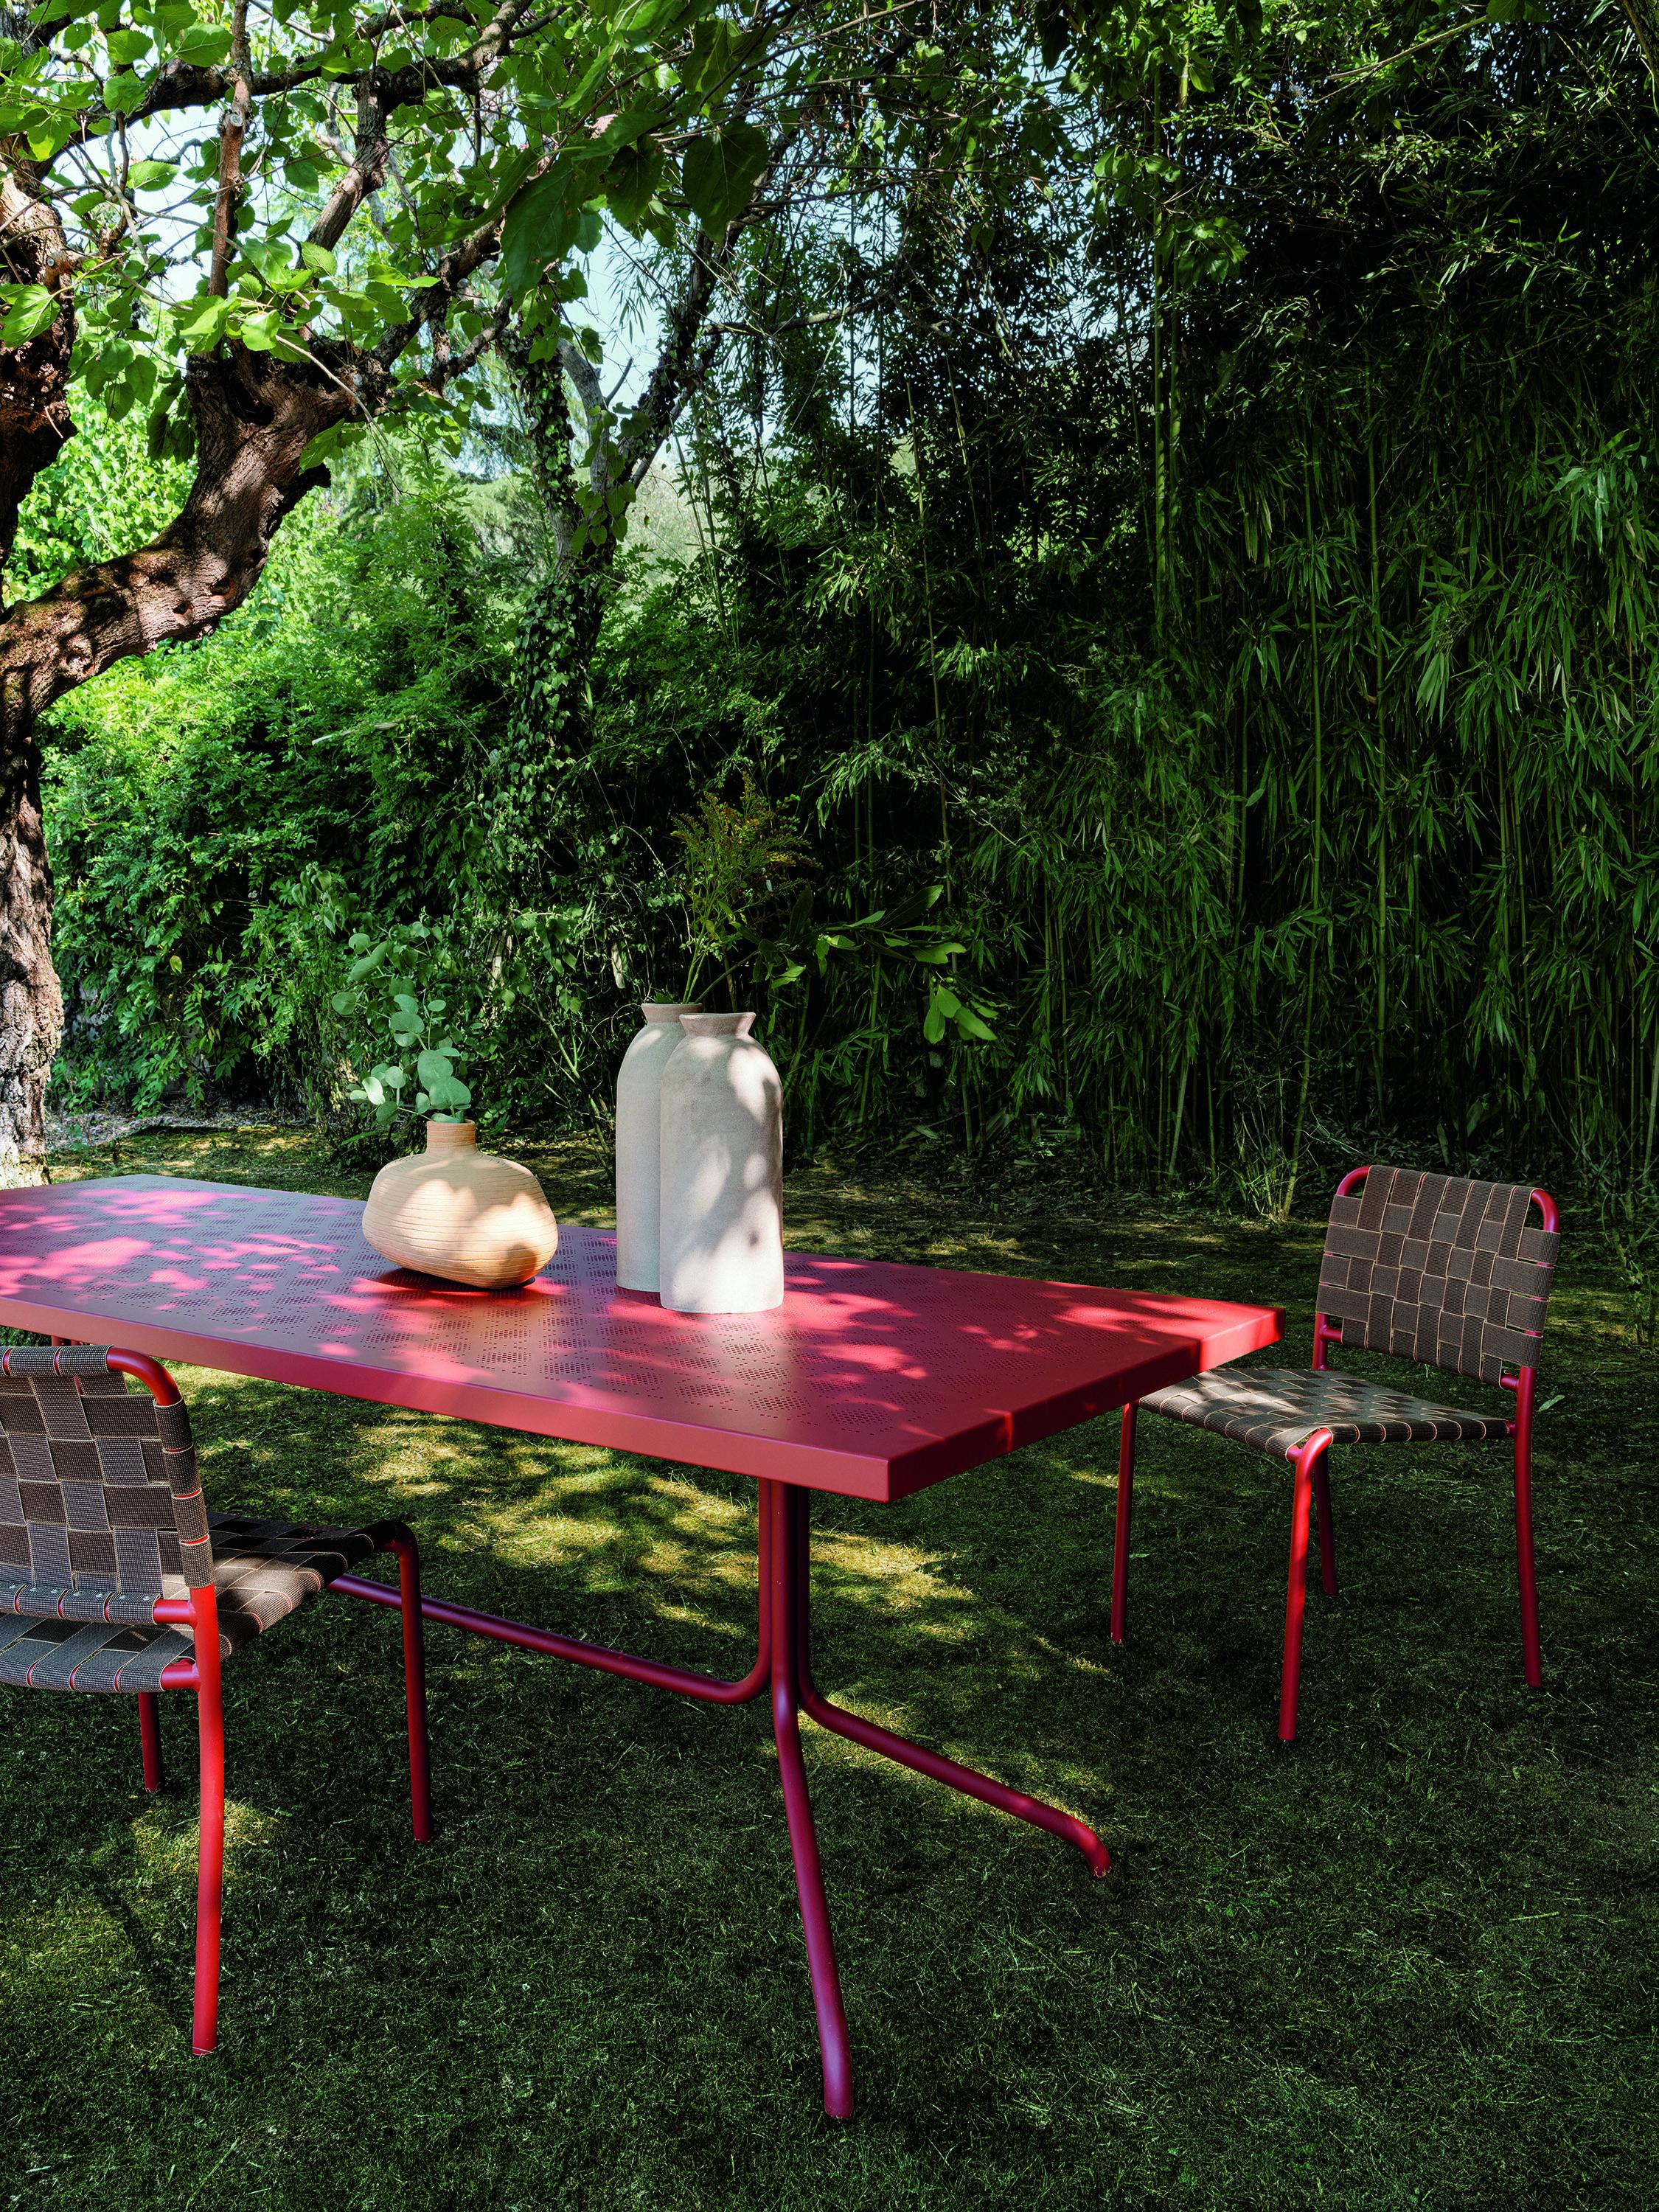 The joy of outdoor entertaining articulated into lots of different forms: Brise tables suggest new ways of conceiving the outdoor table whether for large groups or close relatives and friends. The dining tables' bases are made of tubular stainless